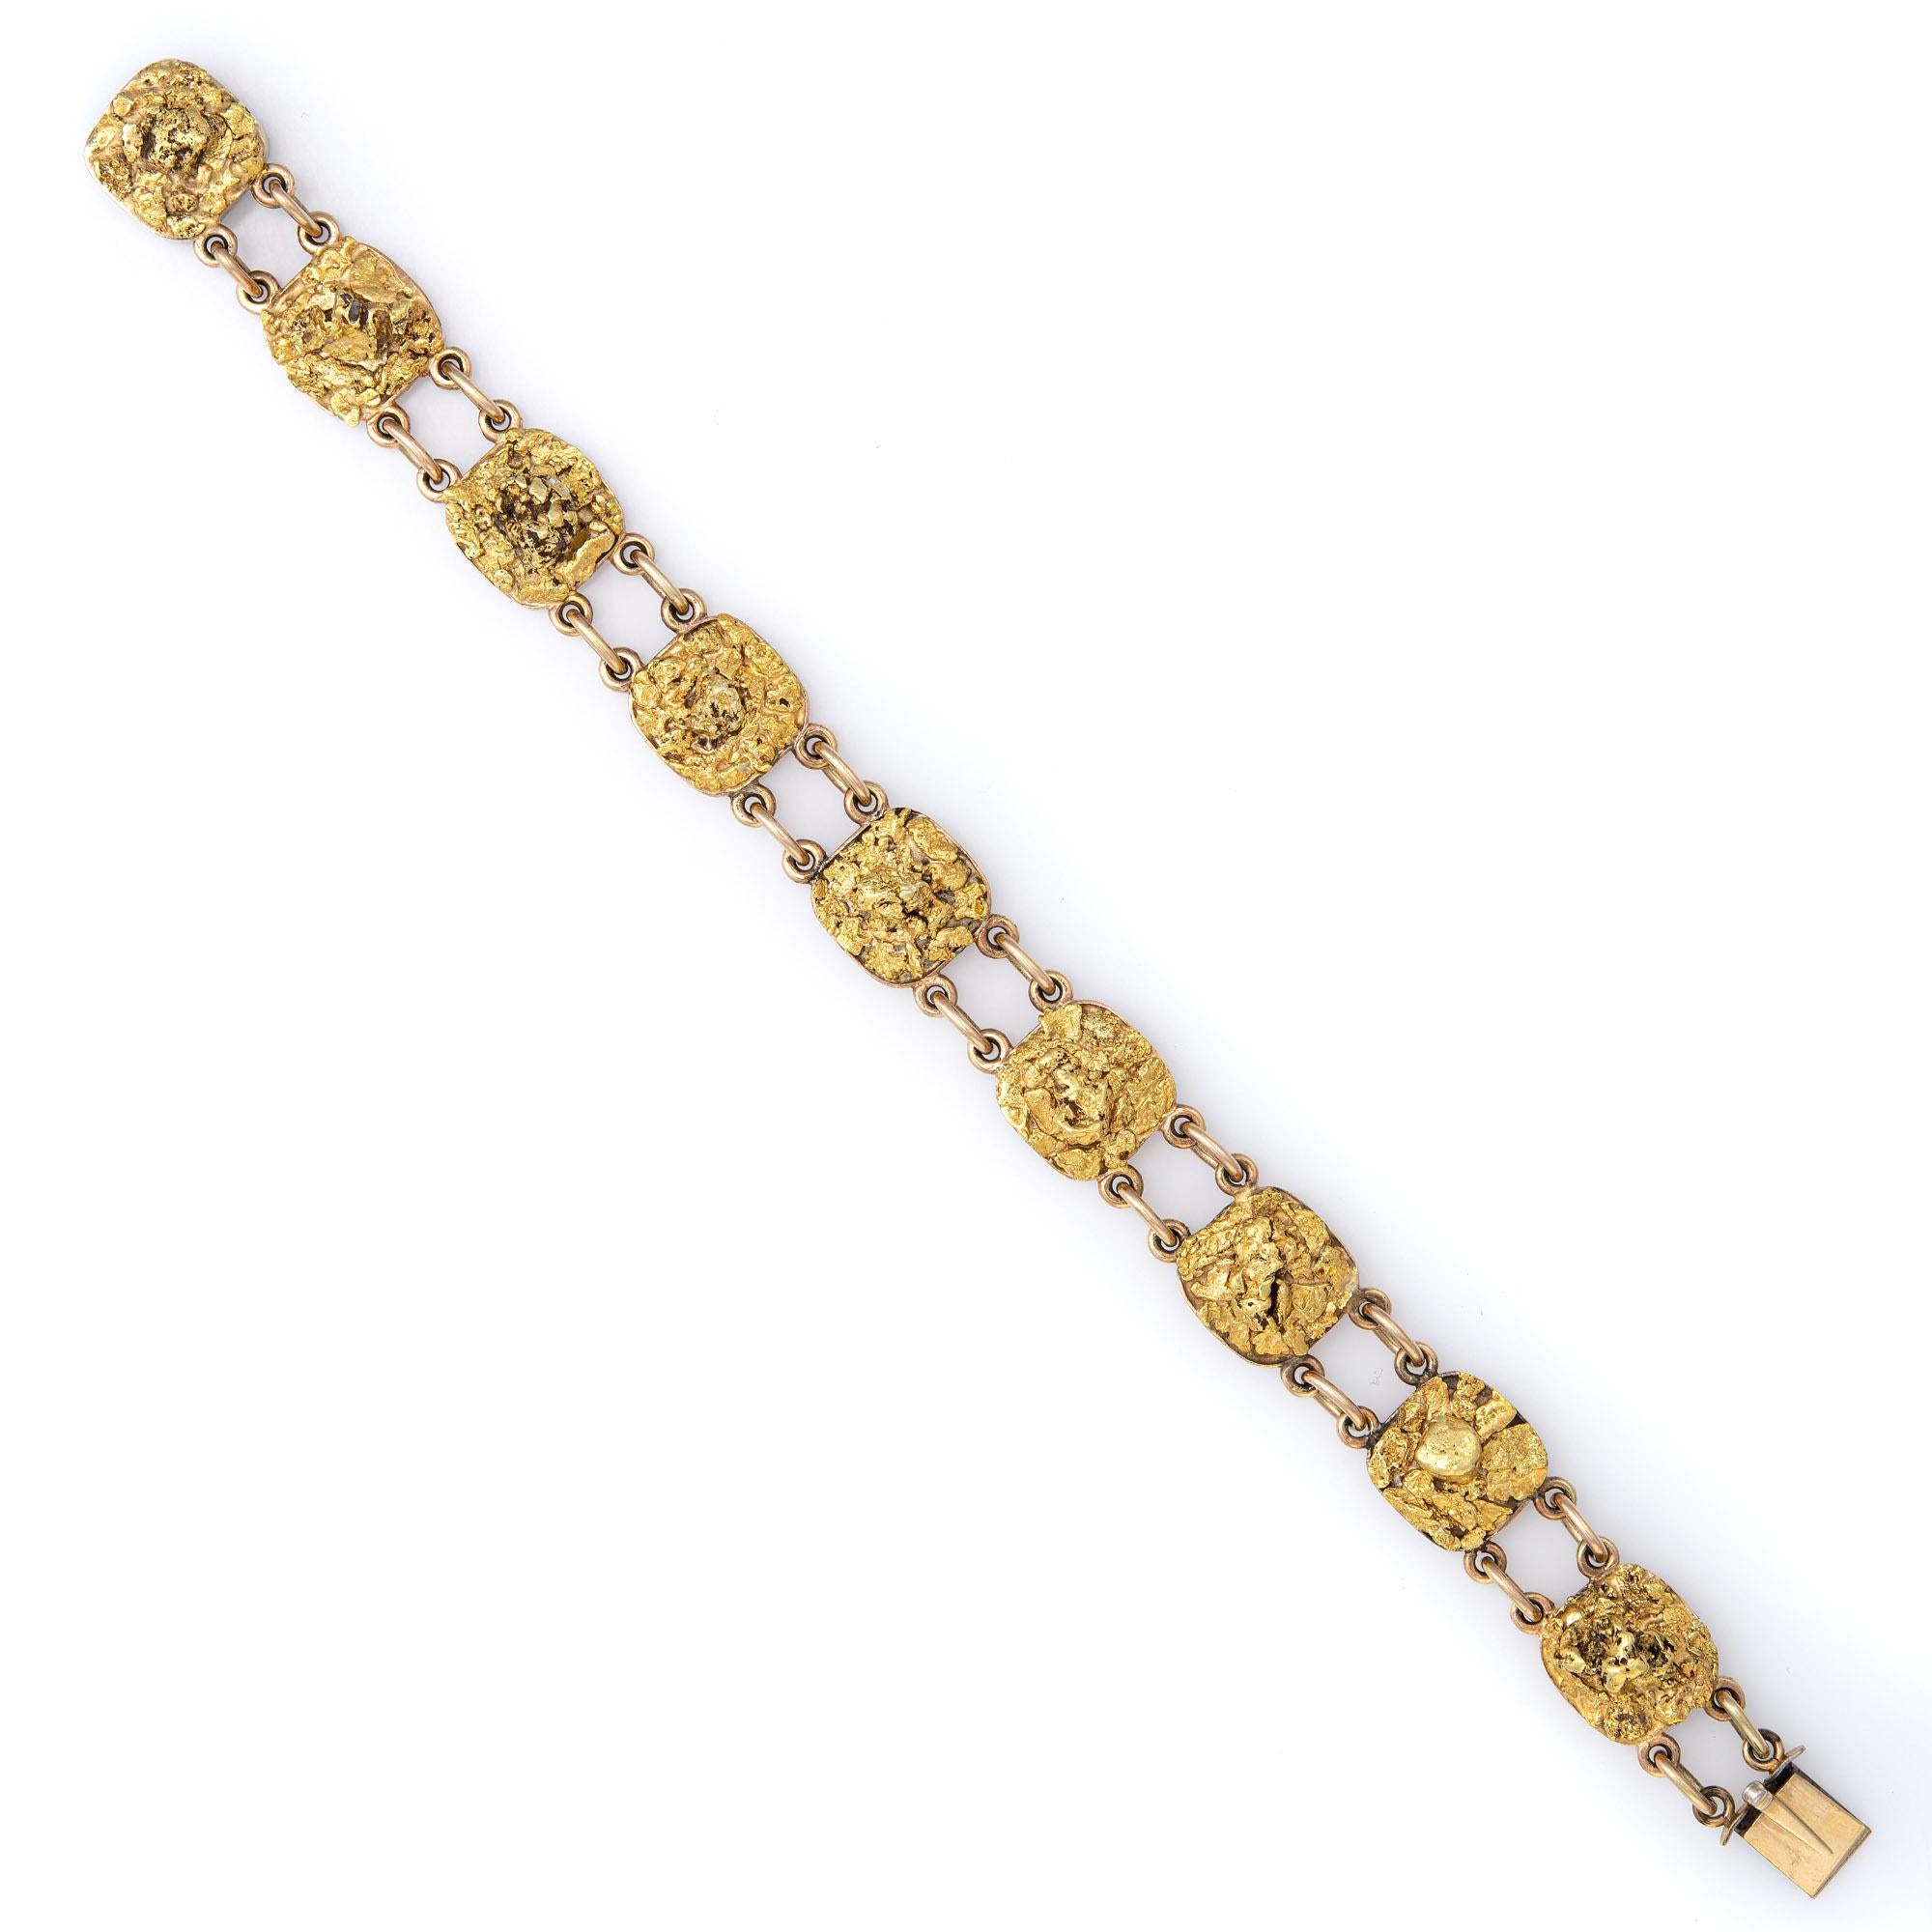 Stylish and finely detailed vintage natural gold nugget bracelet crafted in 10 karat yellow gold (the gold nuggets range from 18k to 20k). 

The classic 70s era bracelet features square panels (10k gold) with natural gold nuggets attached to the top